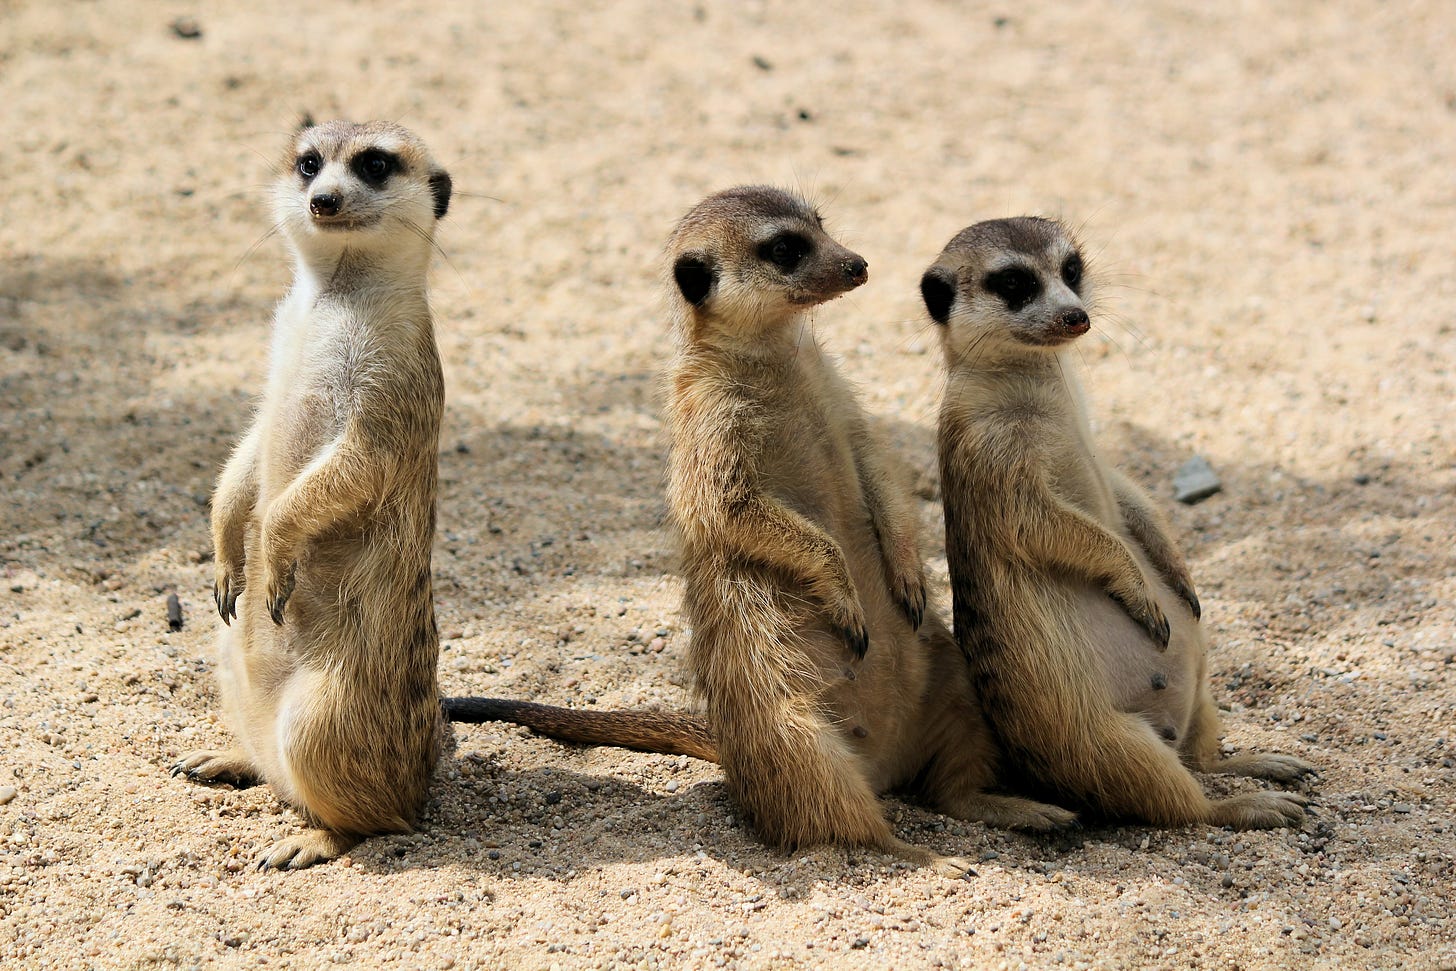 Three meerkats. One looking left, two looking right.